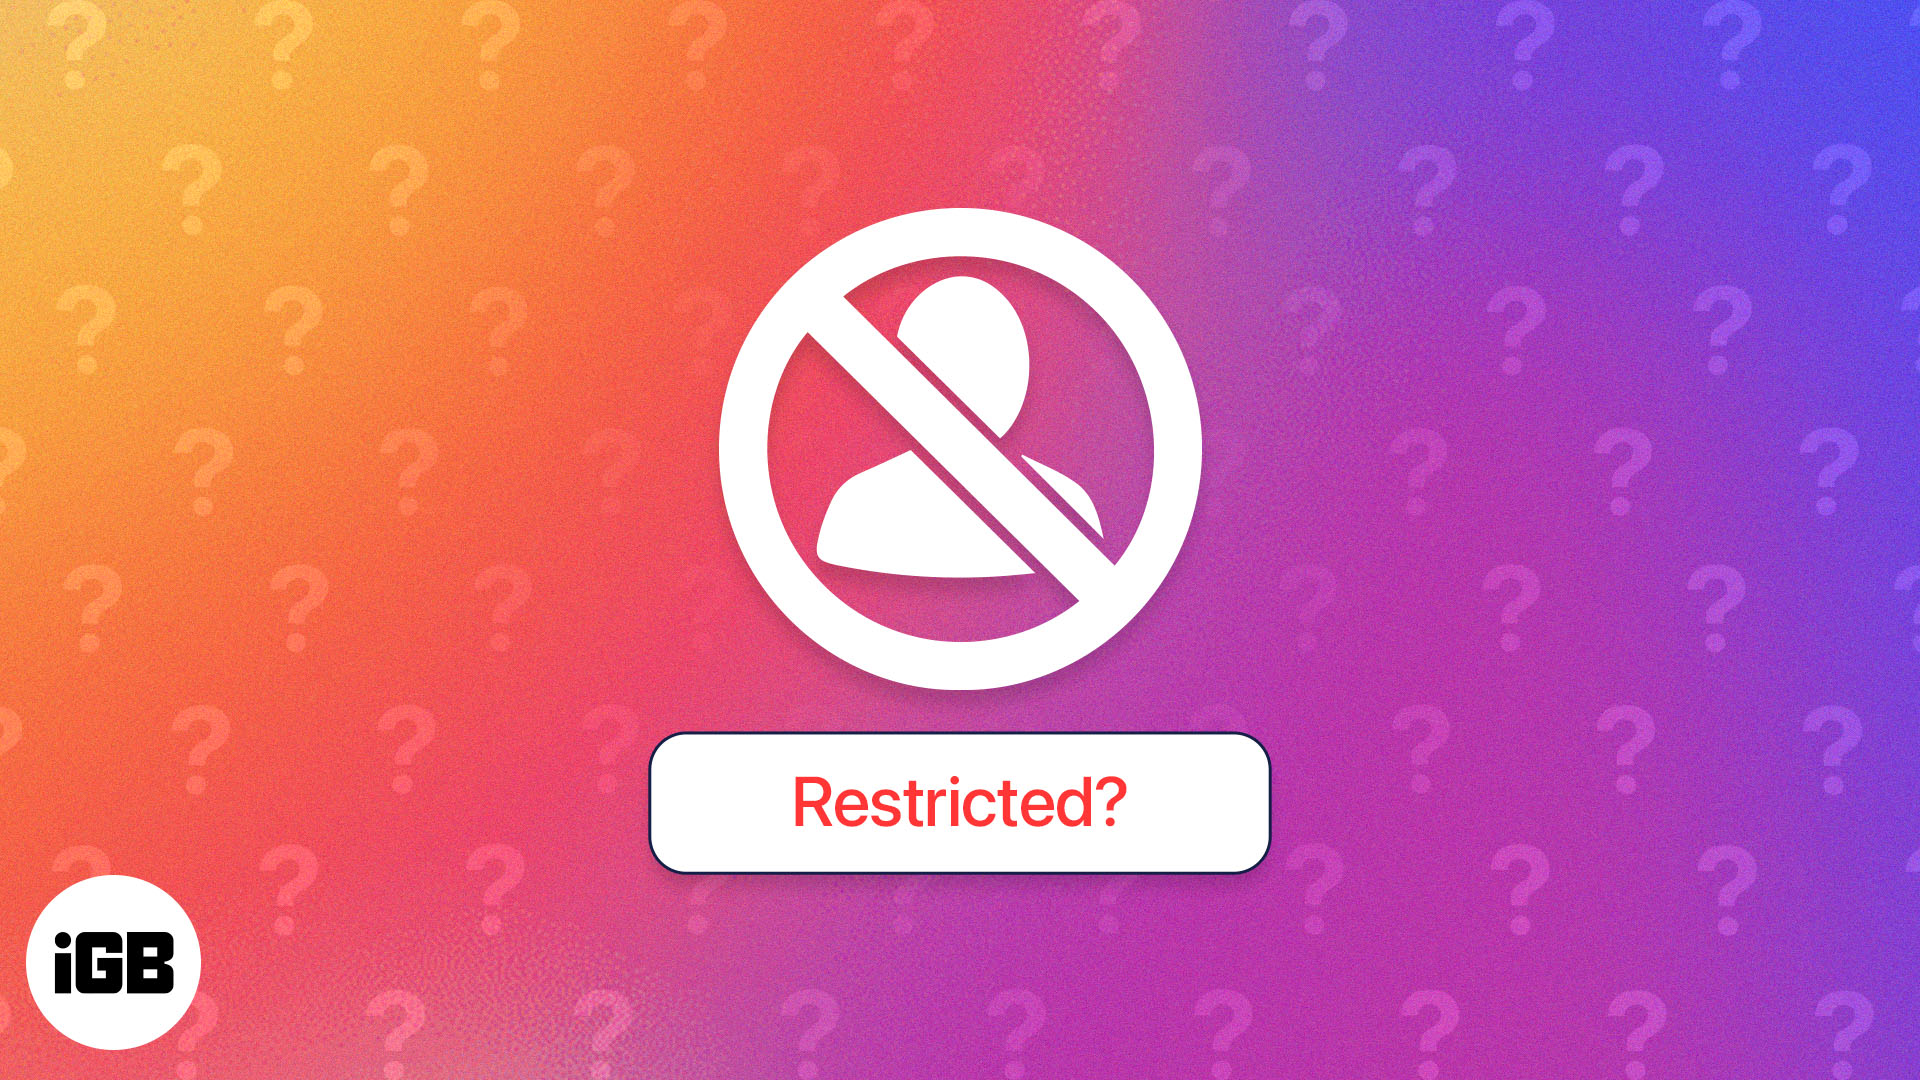 What happens when you restrict someone on Instagram? Explained